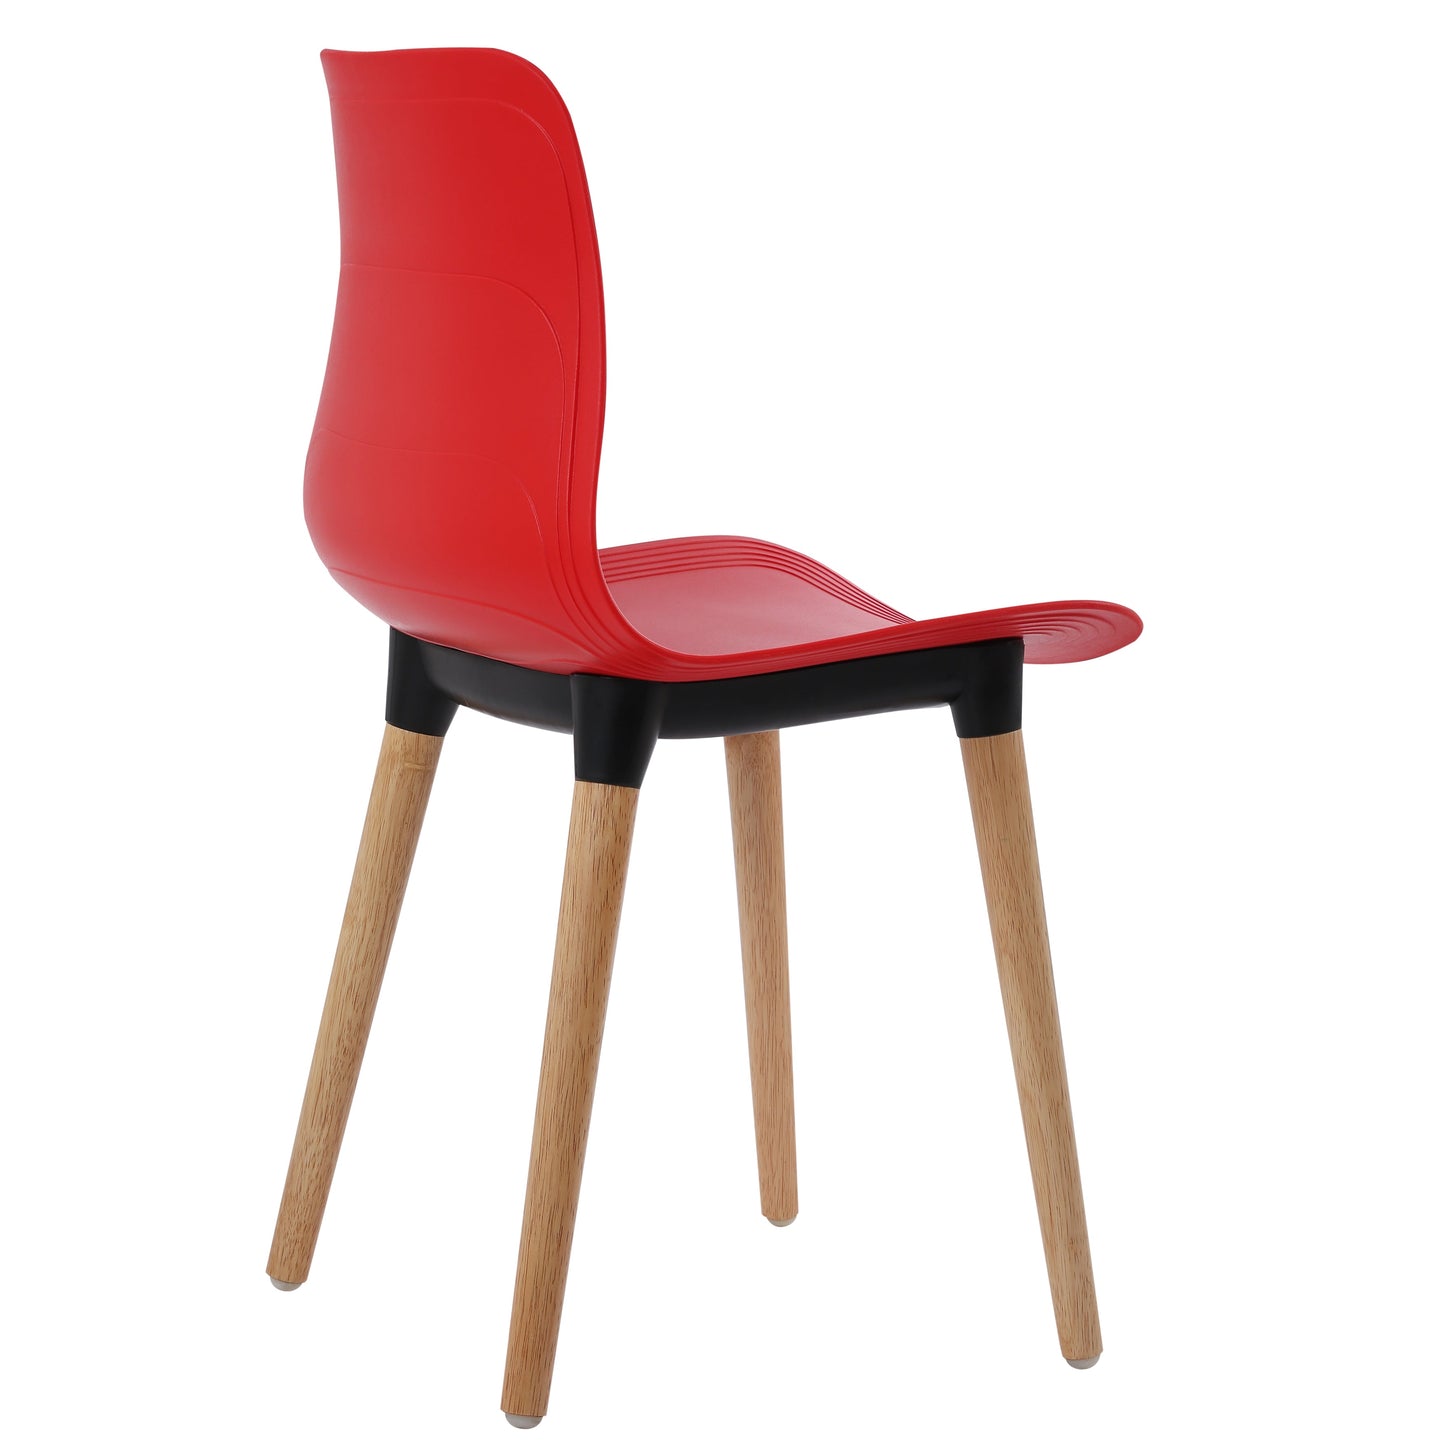 Plastic Chairs With Wood Legs For Cafe and Dining HIFUWA-G (Light Red)